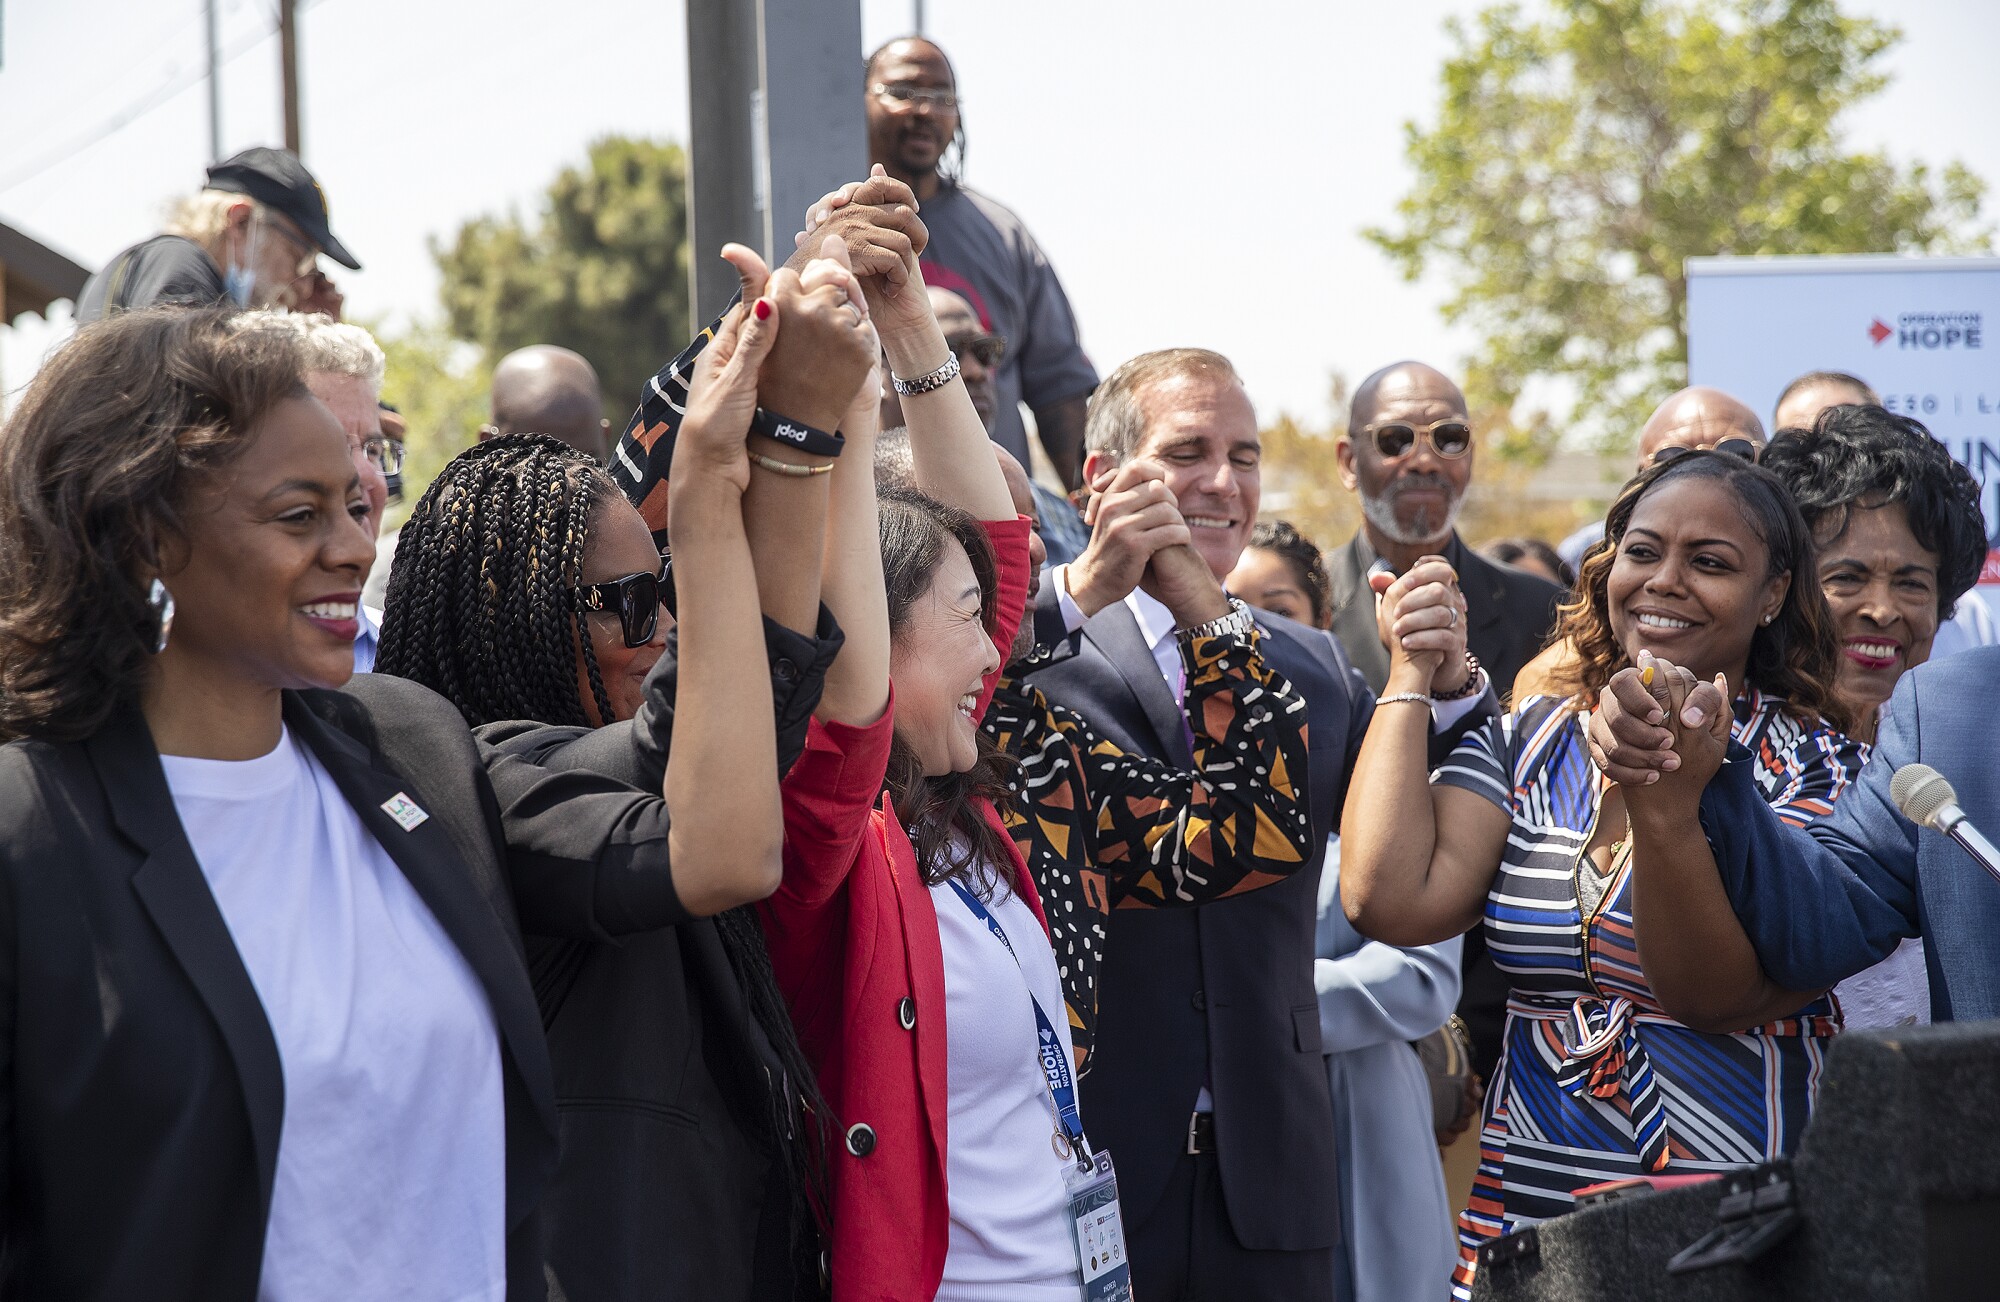 The Los Angeles mayor raises hands with a group gathered at a news conference.